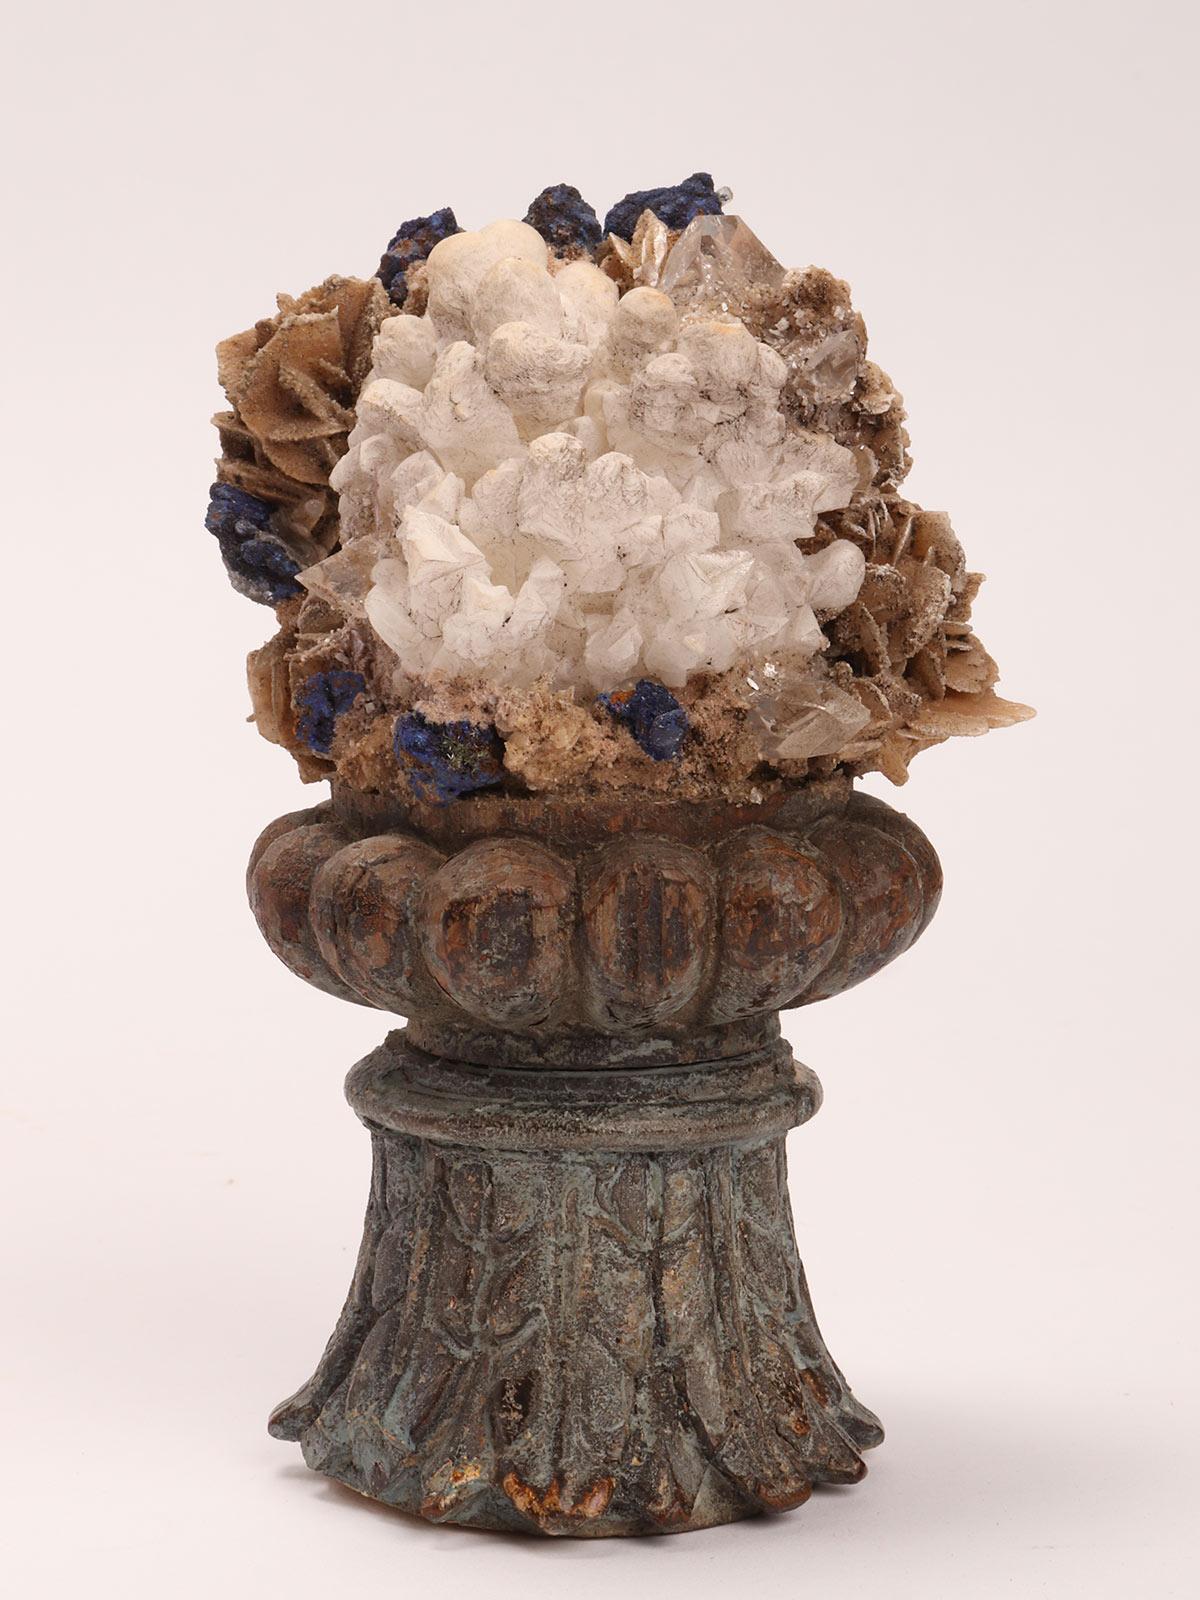 19th Century A composition of calcite flower, blu quartz and rock crystals, Italy 1880. For Sale